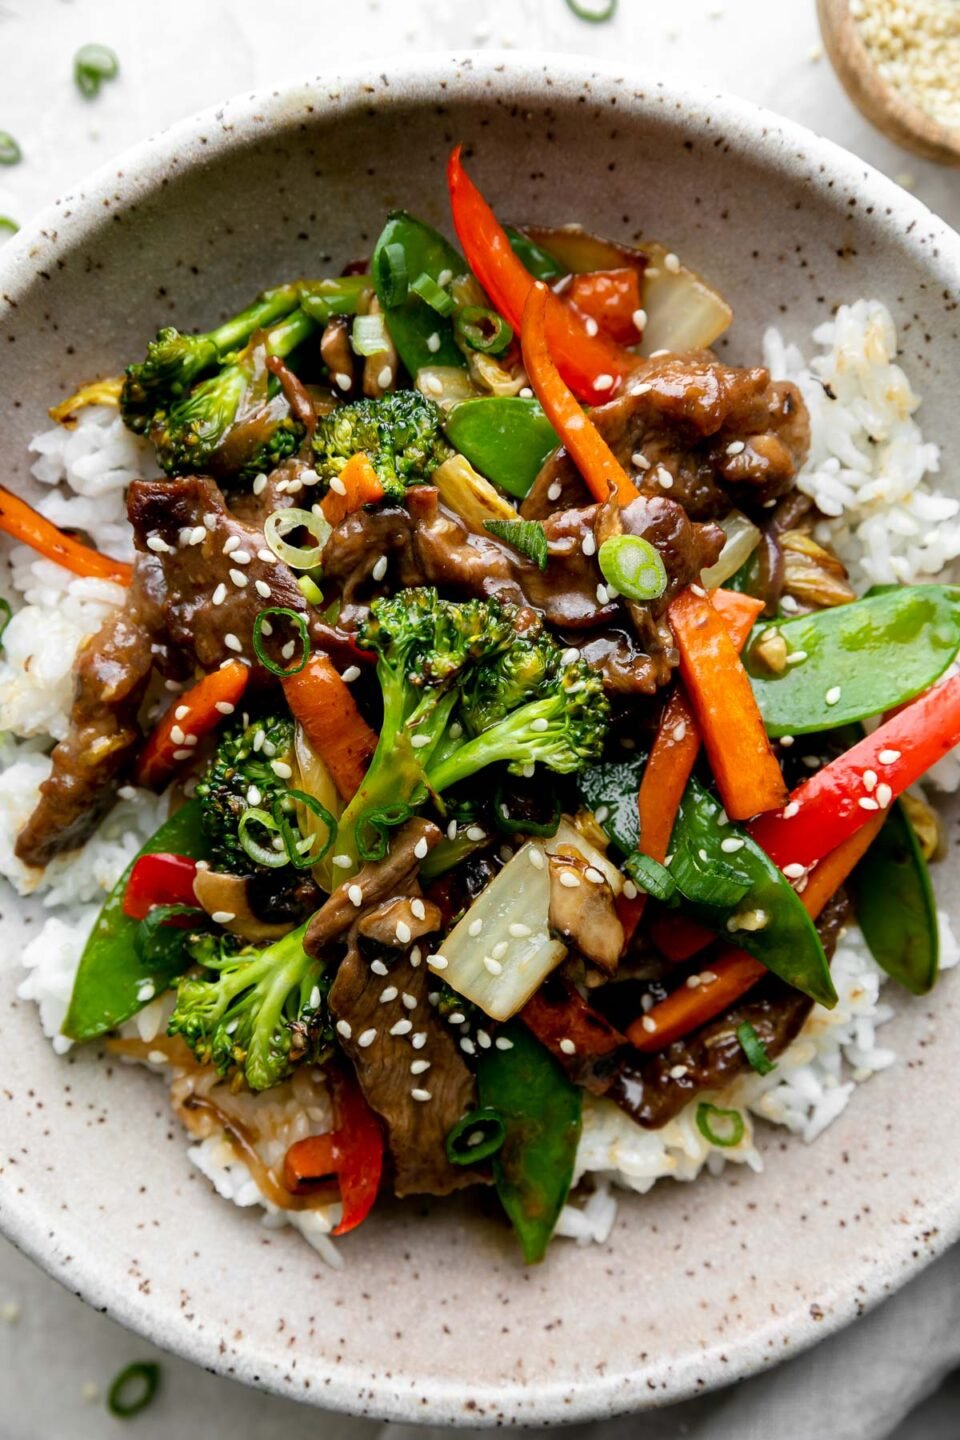 A serving of beef and vegetable stir fry fills a gray speckled ceramic bowl atop a bed of white rice. The beef and veggie stir fry has been garnished with toasted sesame seeds and sliced green onion. The bowl sits atop a creamy white textured surface with a light gray linen napkin is tucked alongside the bowl. A small wooden pinch bowl filled with toasted sesame seeds and loosely sprinkled sliced green onion surround the bowl of stir fry.